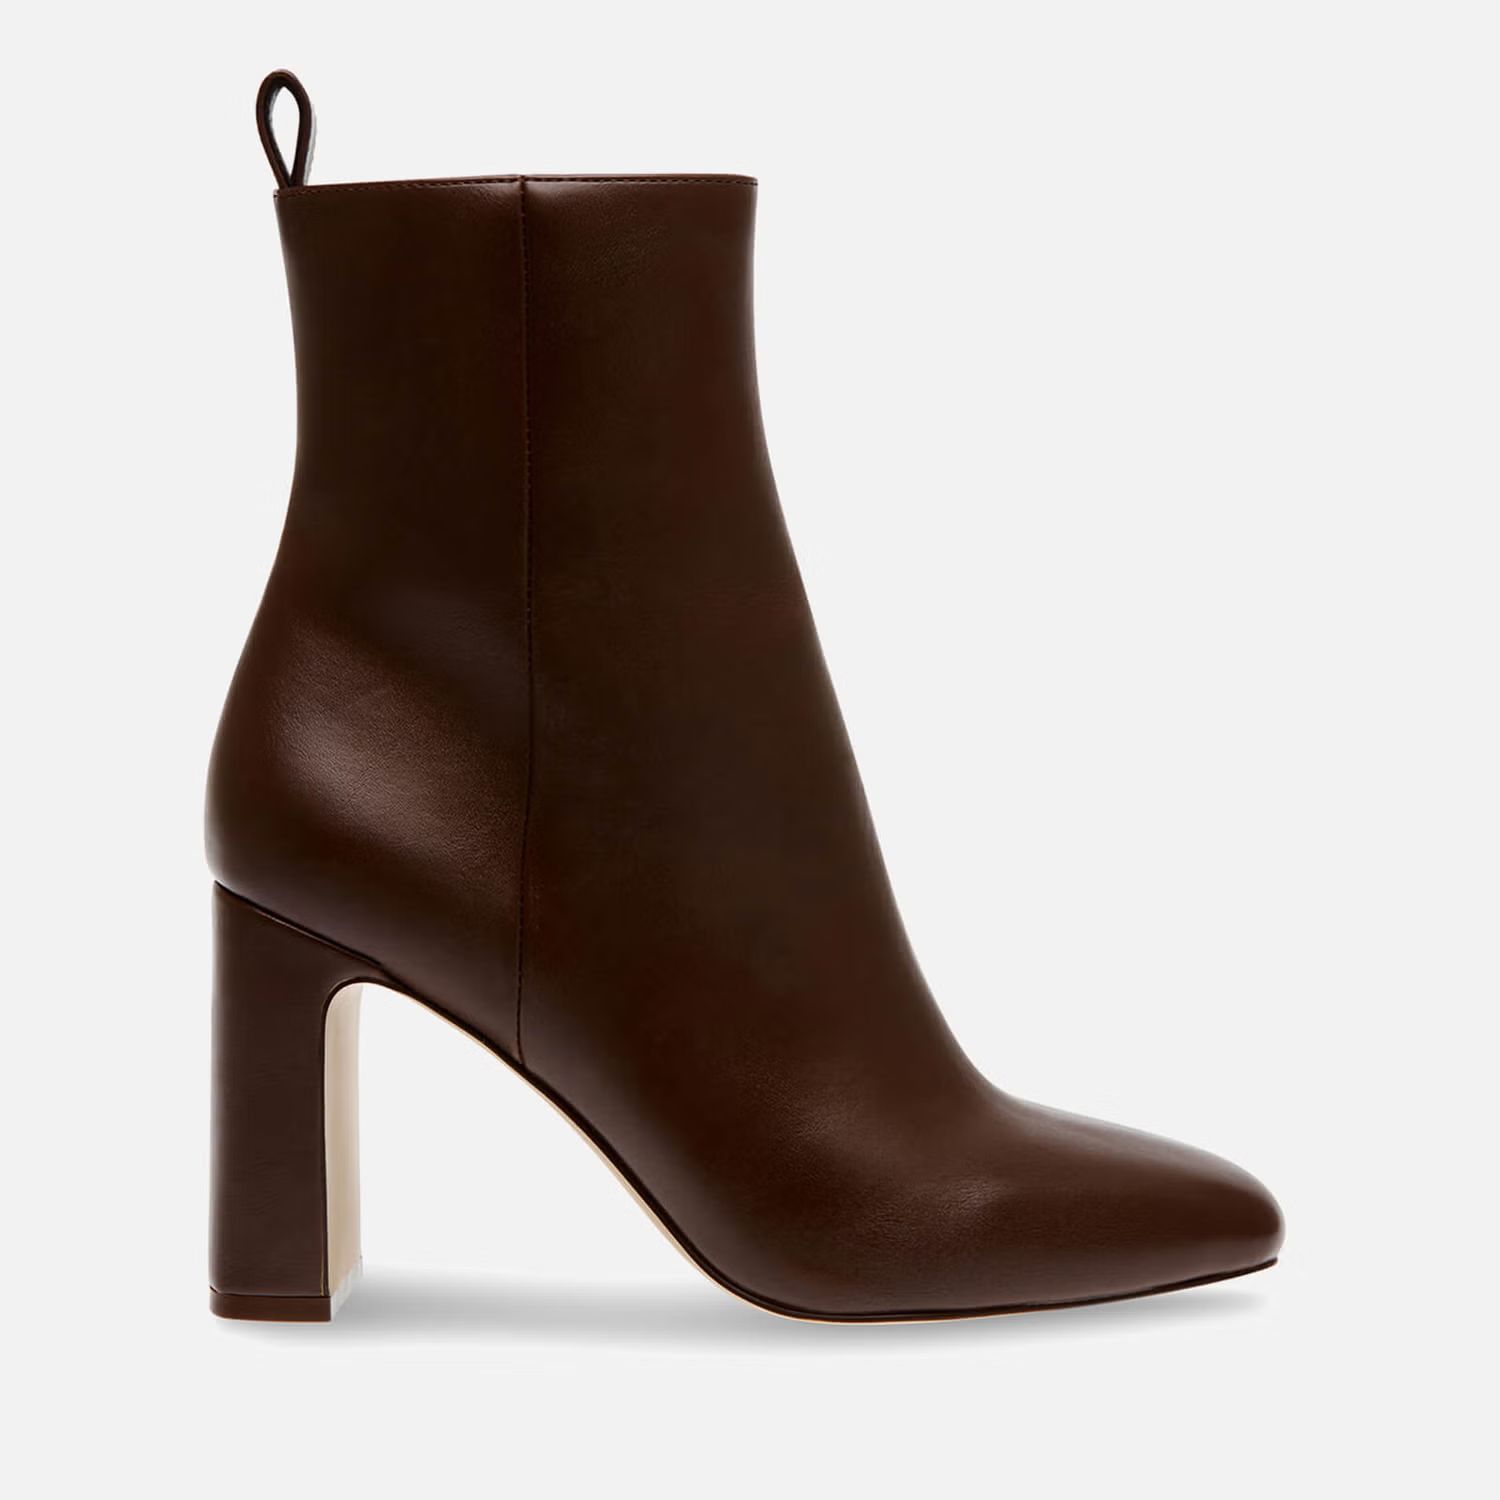 Steve Madden Women's Adelisa Faux Leather Heeled Boots | The Hut (UK)